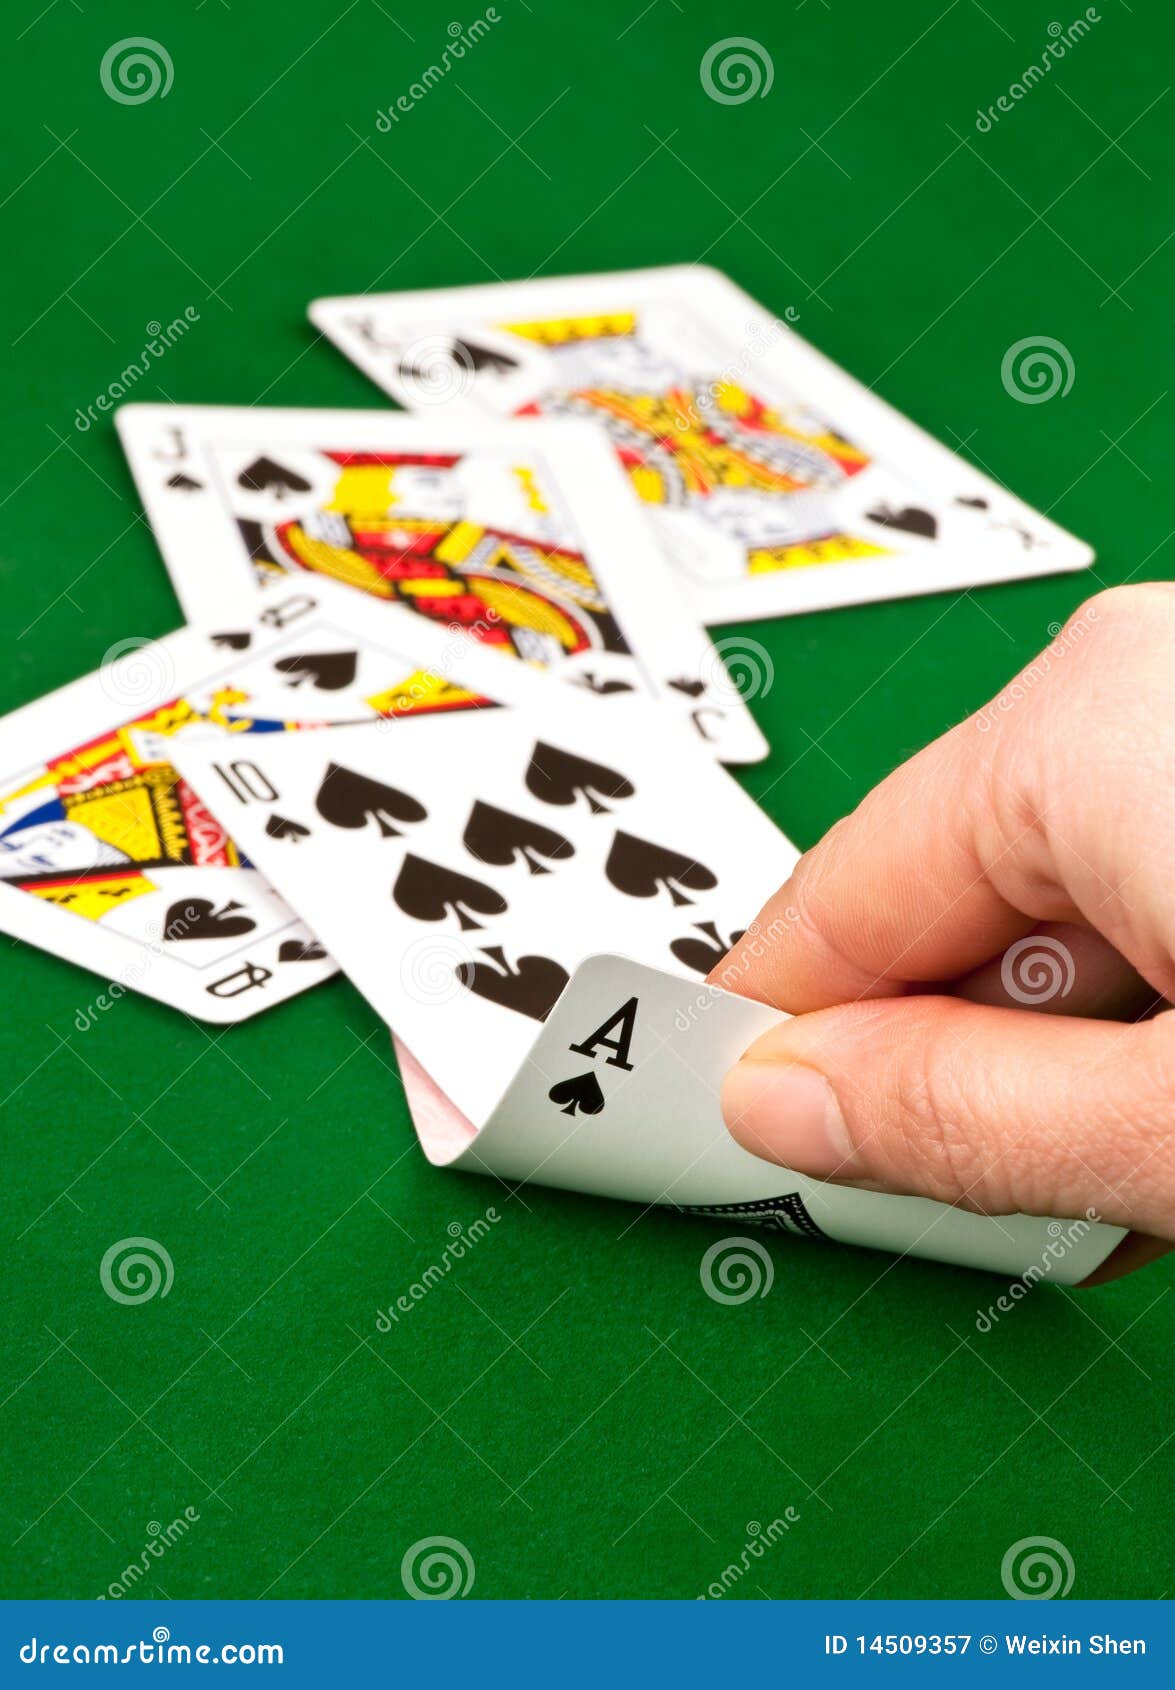 Getting a Straight Flush in Poker Game Stock Image - Image of gamble ...